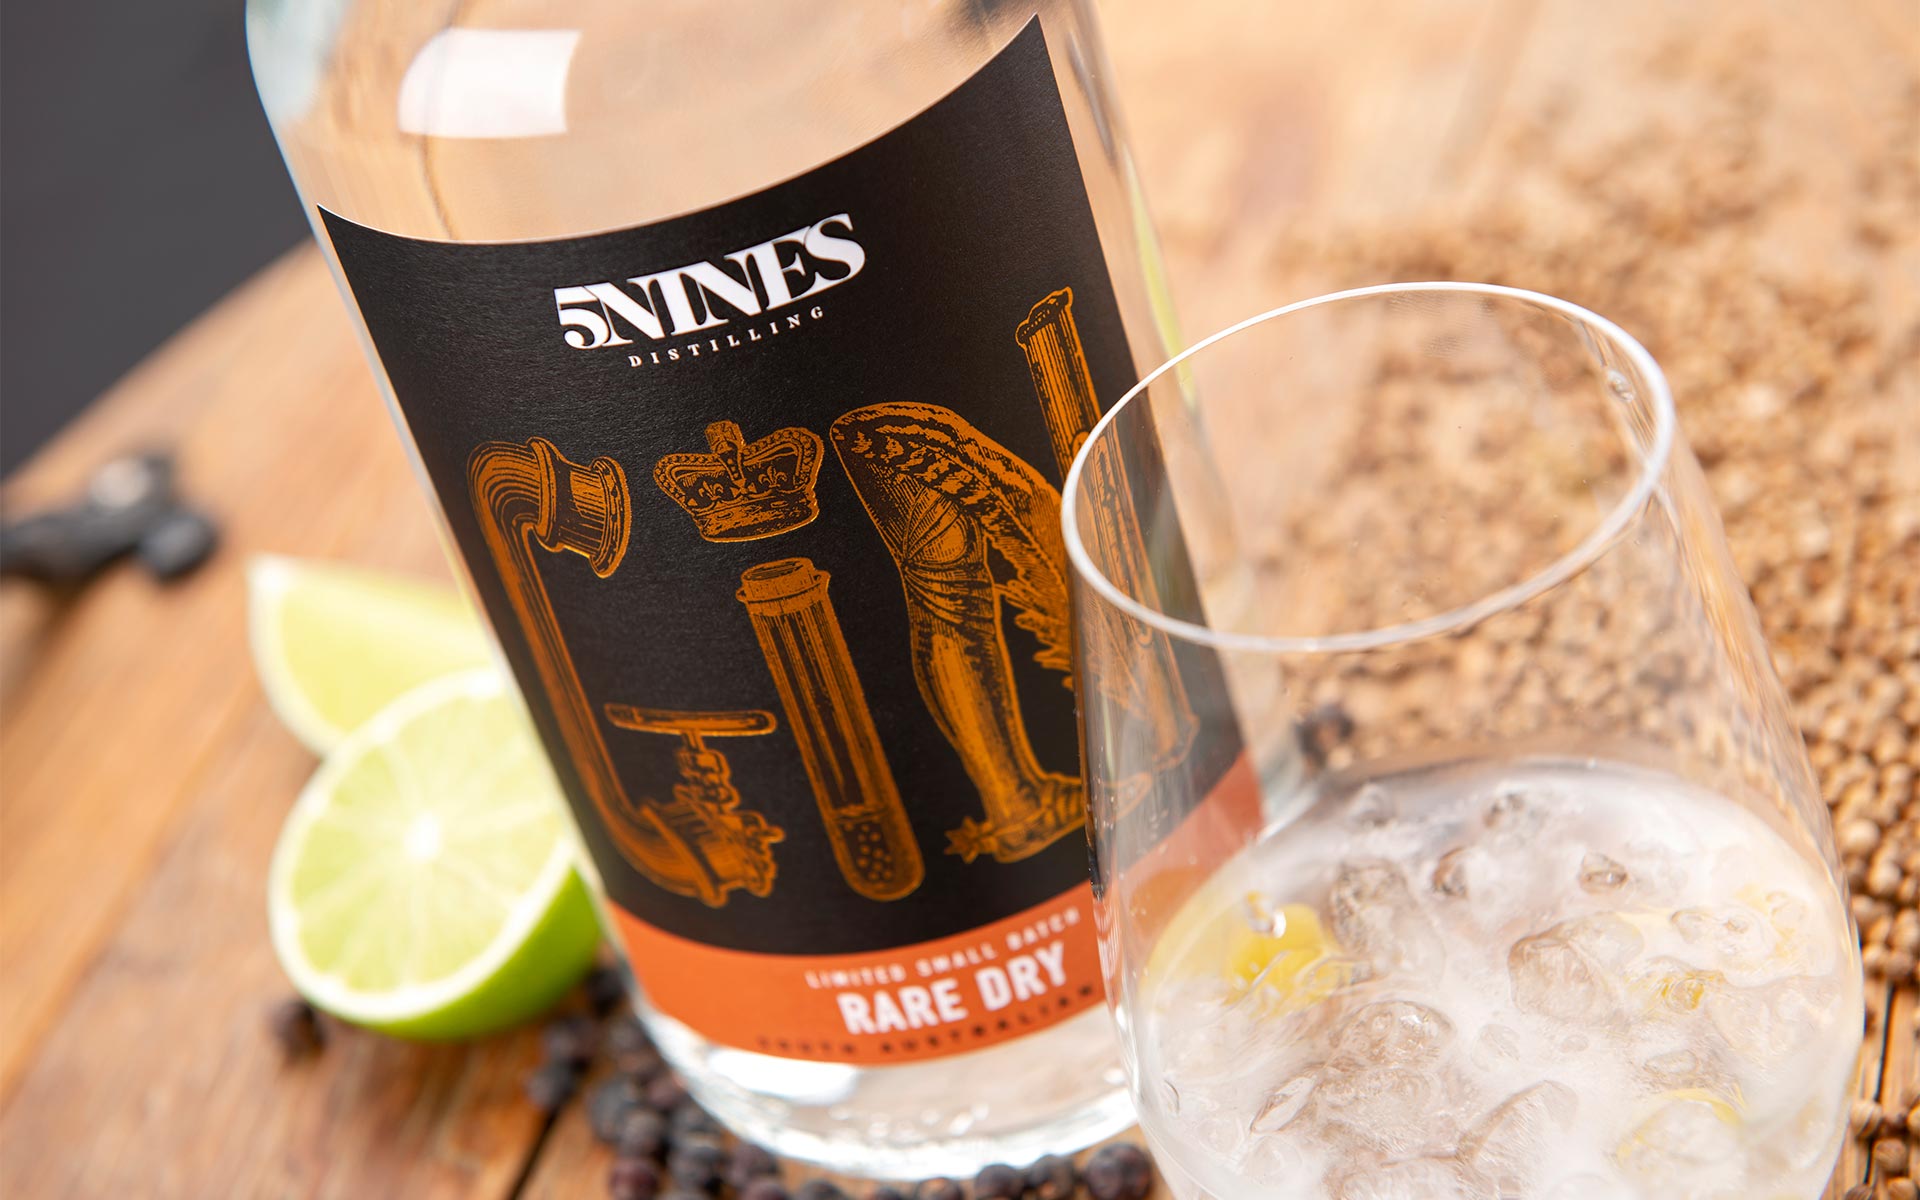 5Nines Rare Dry gin bottle, lime and served drink